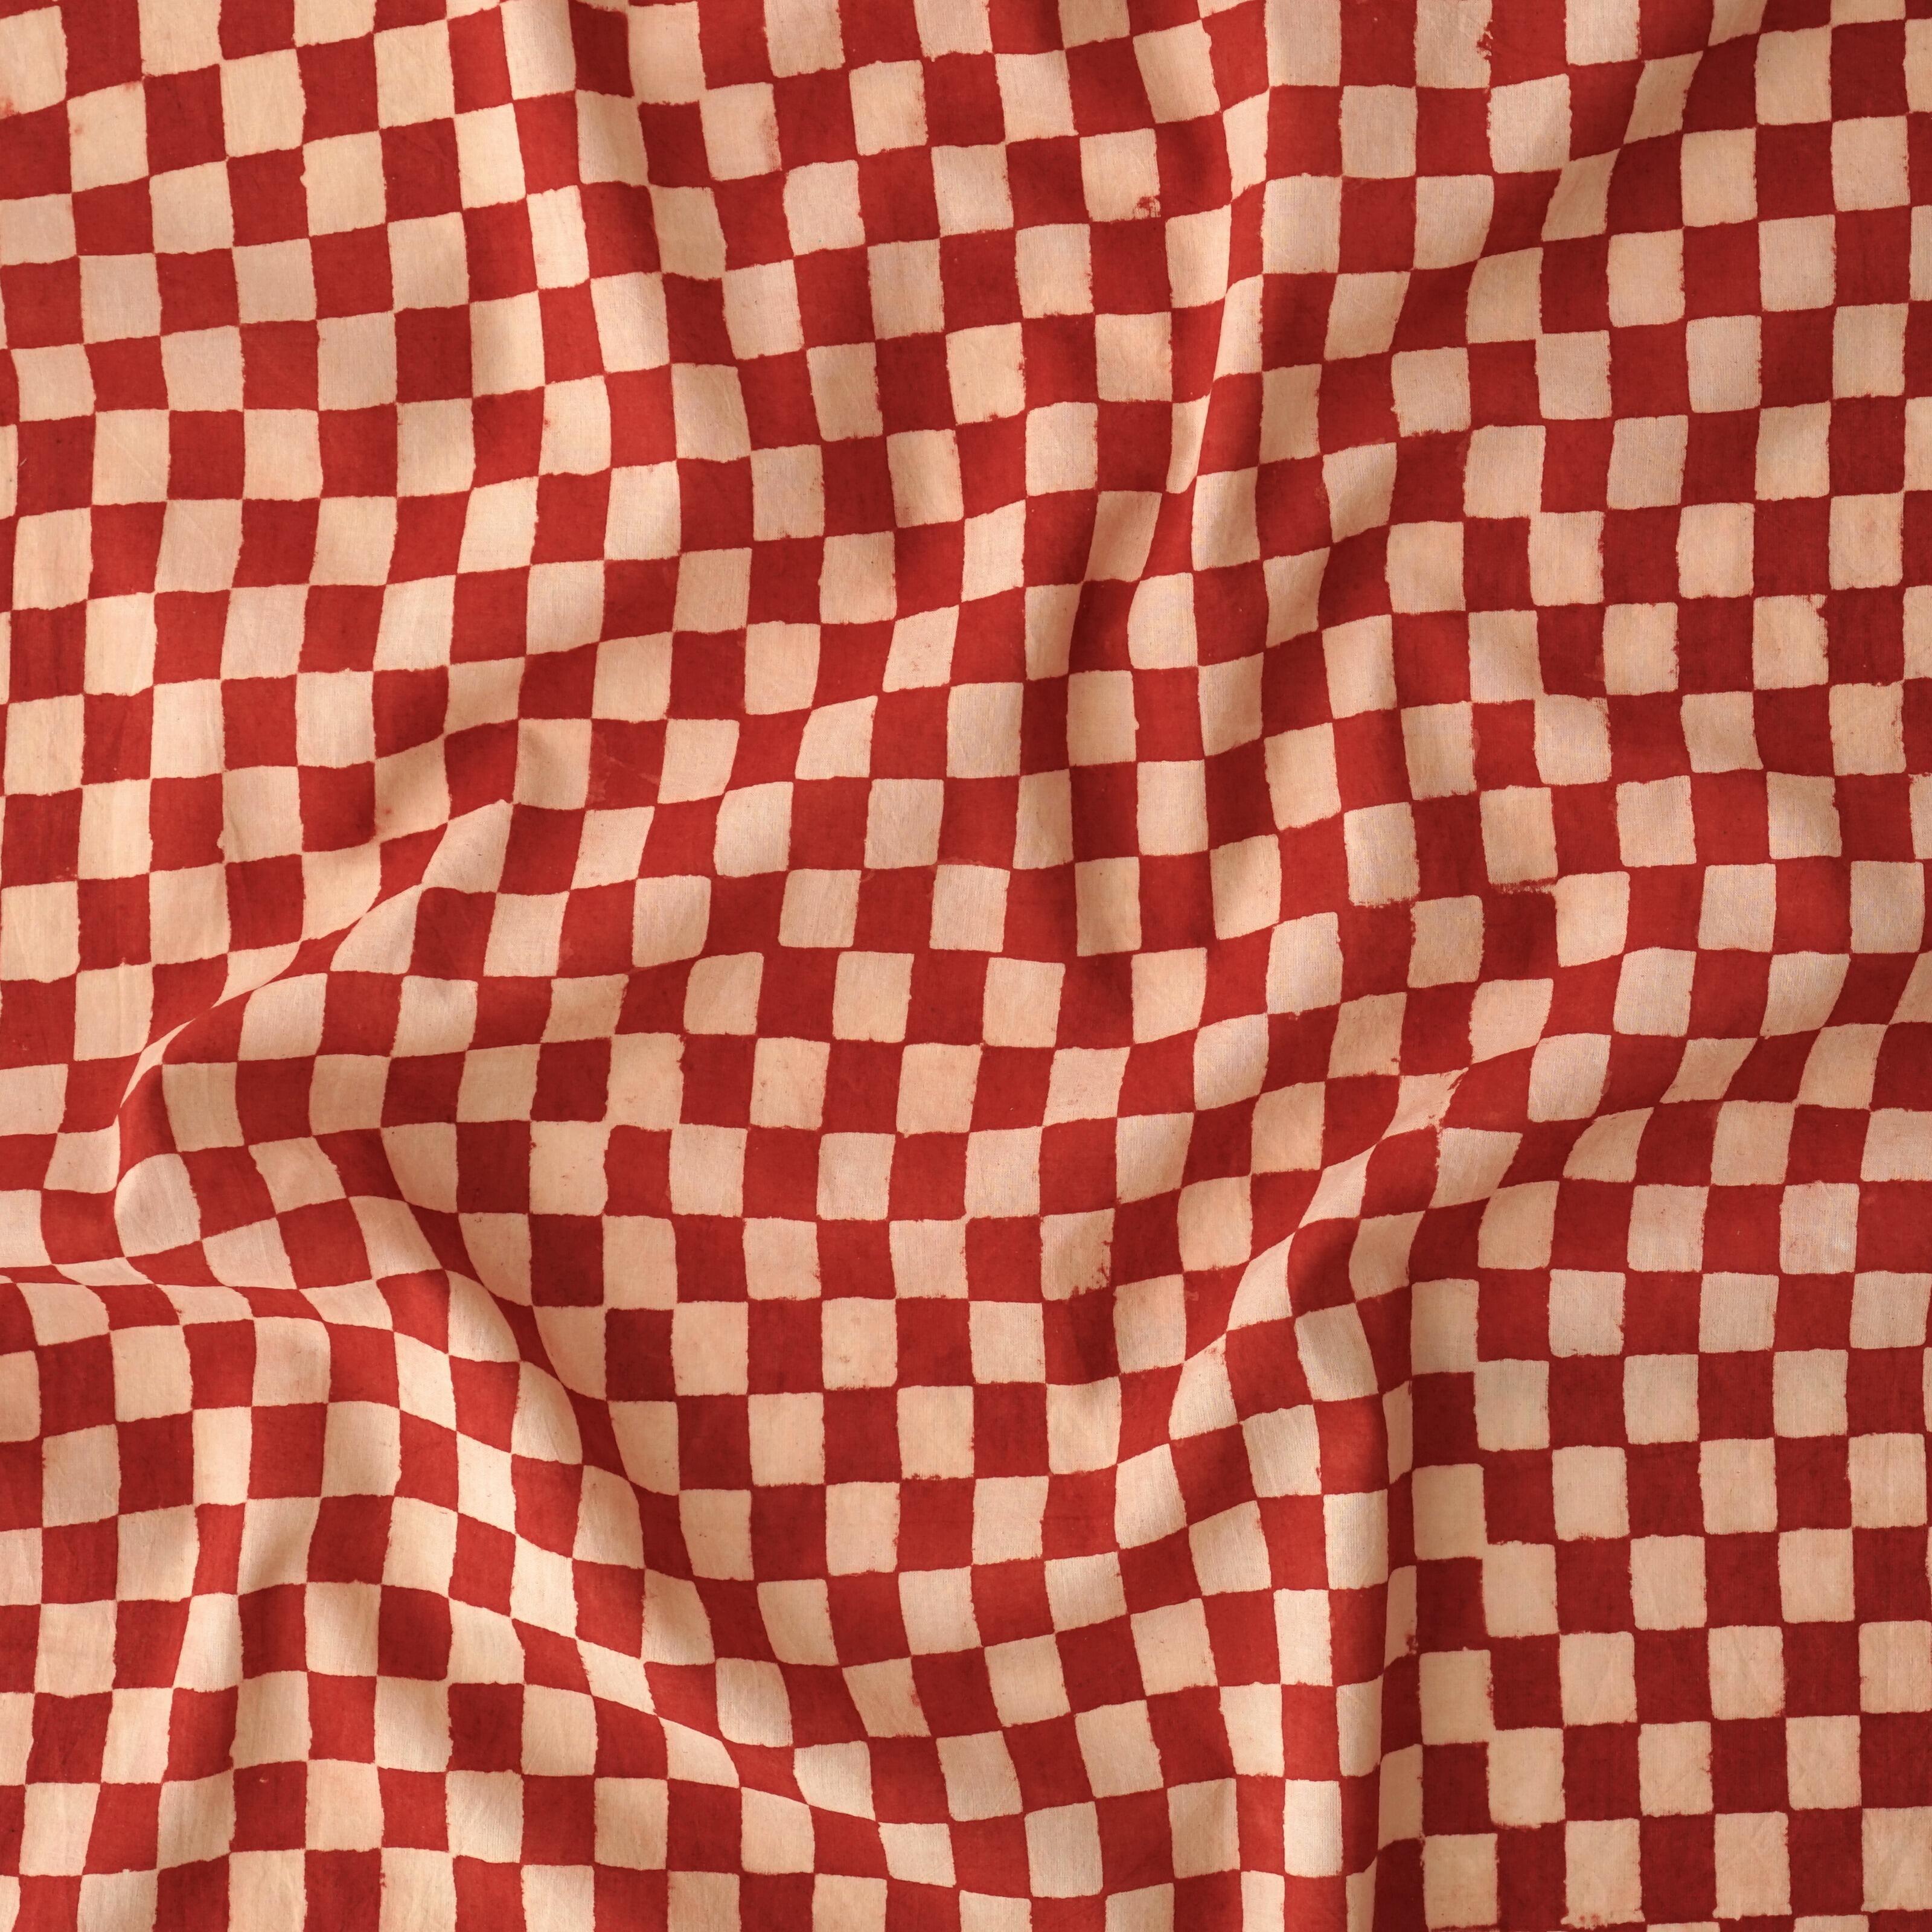 Hand Block-Printed Cotton - Checkers Print - Red Alizarin & White - Contrast